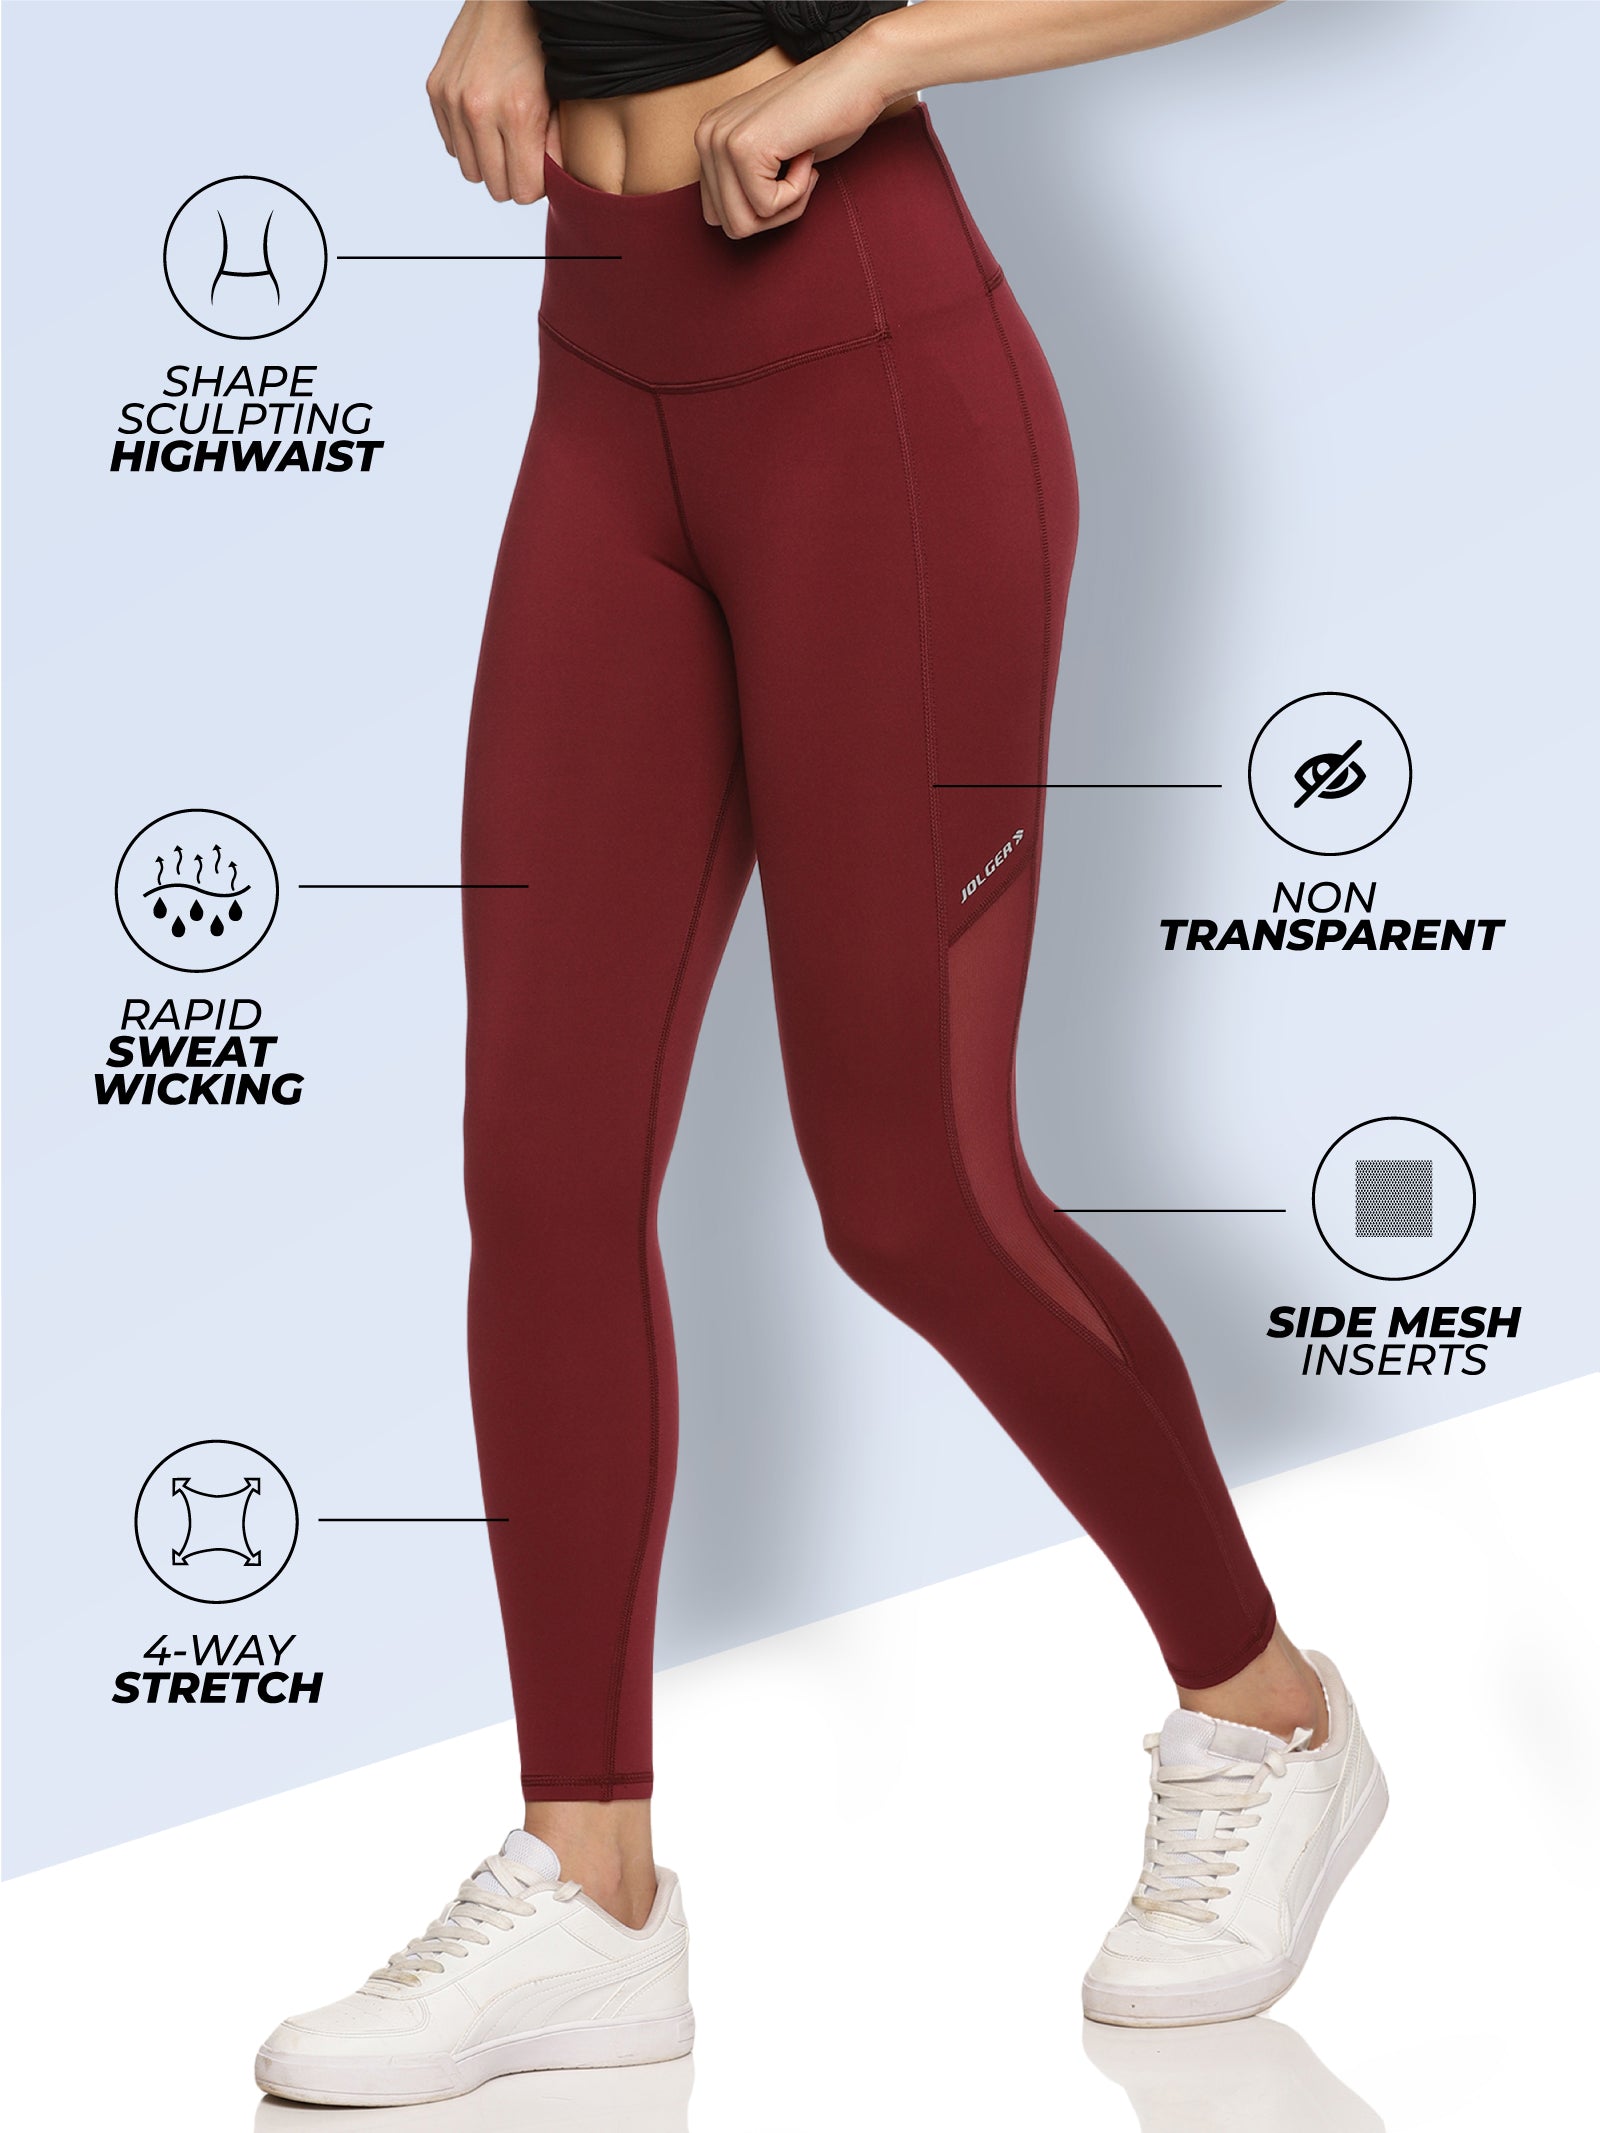 Sporty Spice Butter Soft High Waist Legging In Chocolate • Impressions  Online Boutique